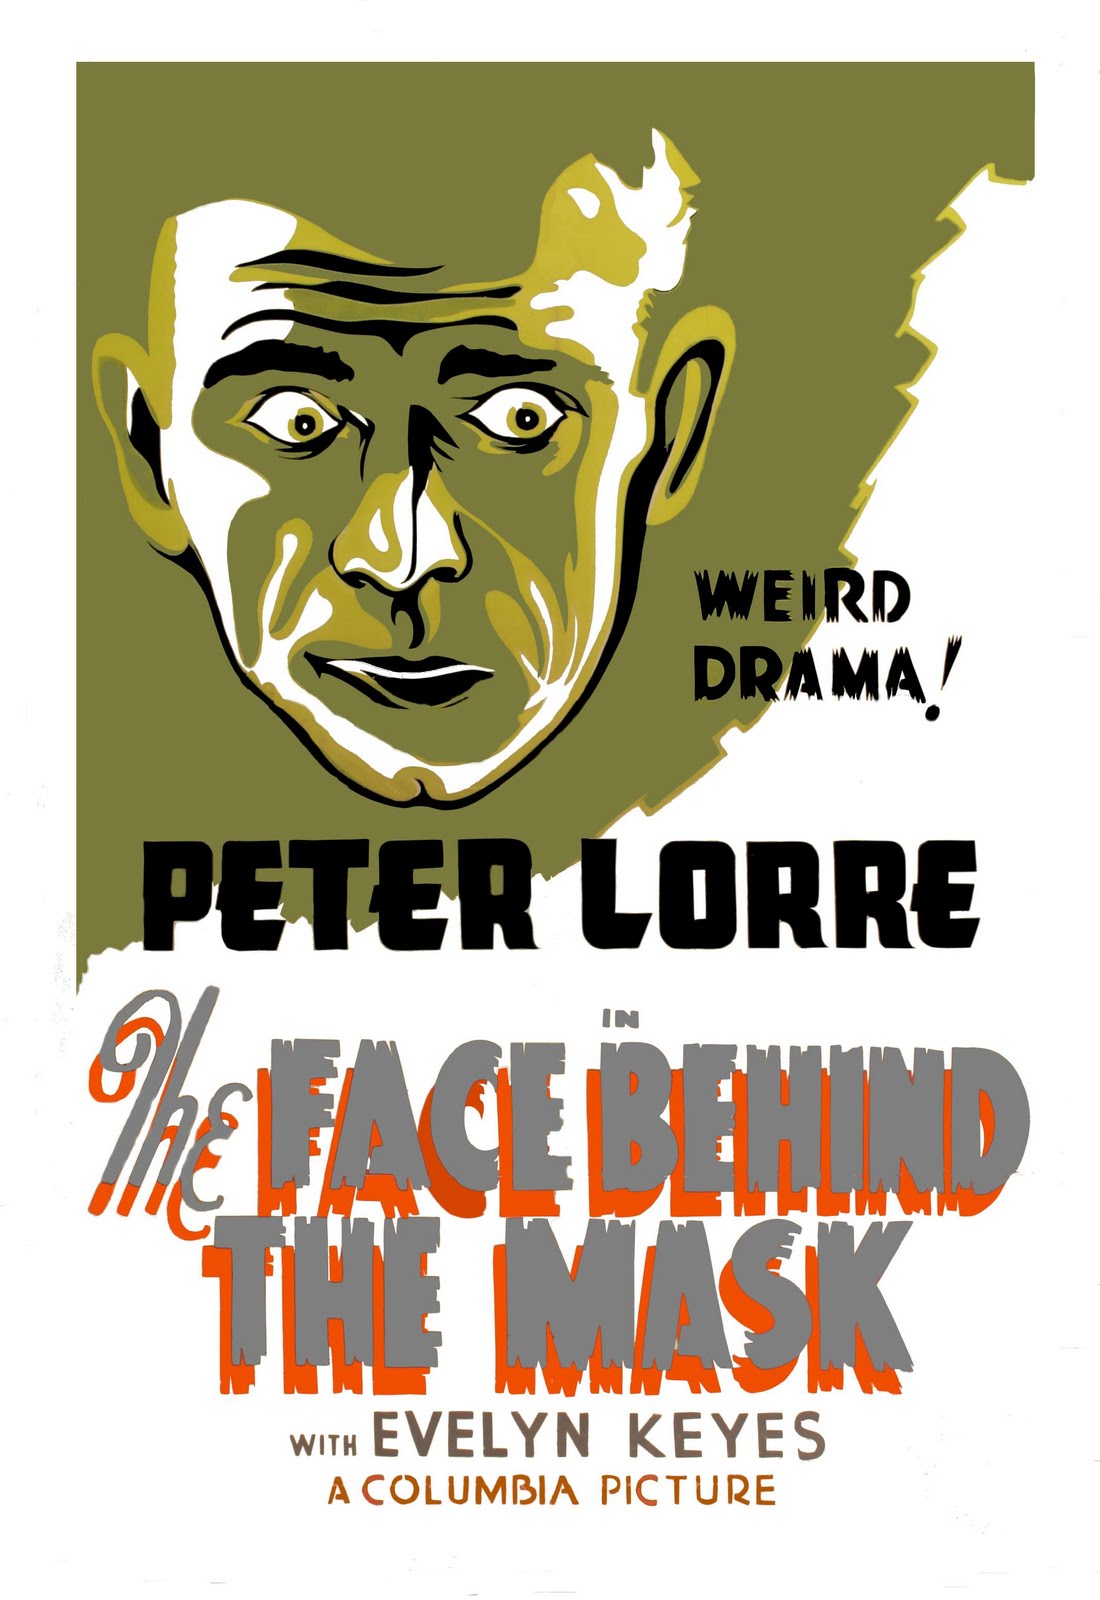 Peter Lorre در صحنه فیلم سینمایی The Face Behind the Mask